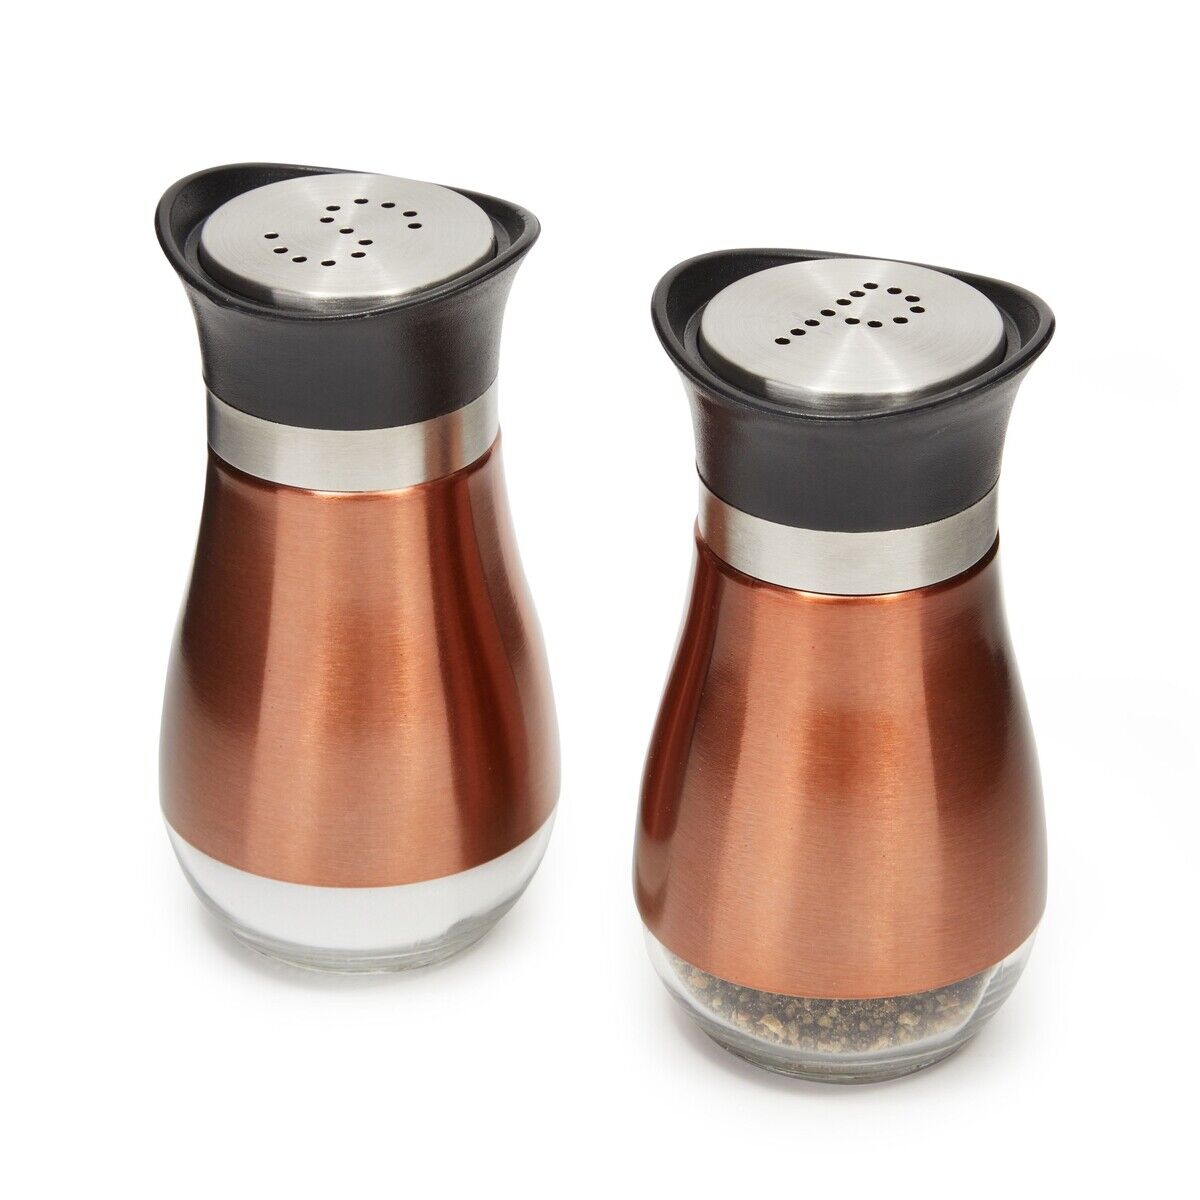 Stainless Steel Copper Salt and Pepper Shakers Set with Glass Bottom, 4oz